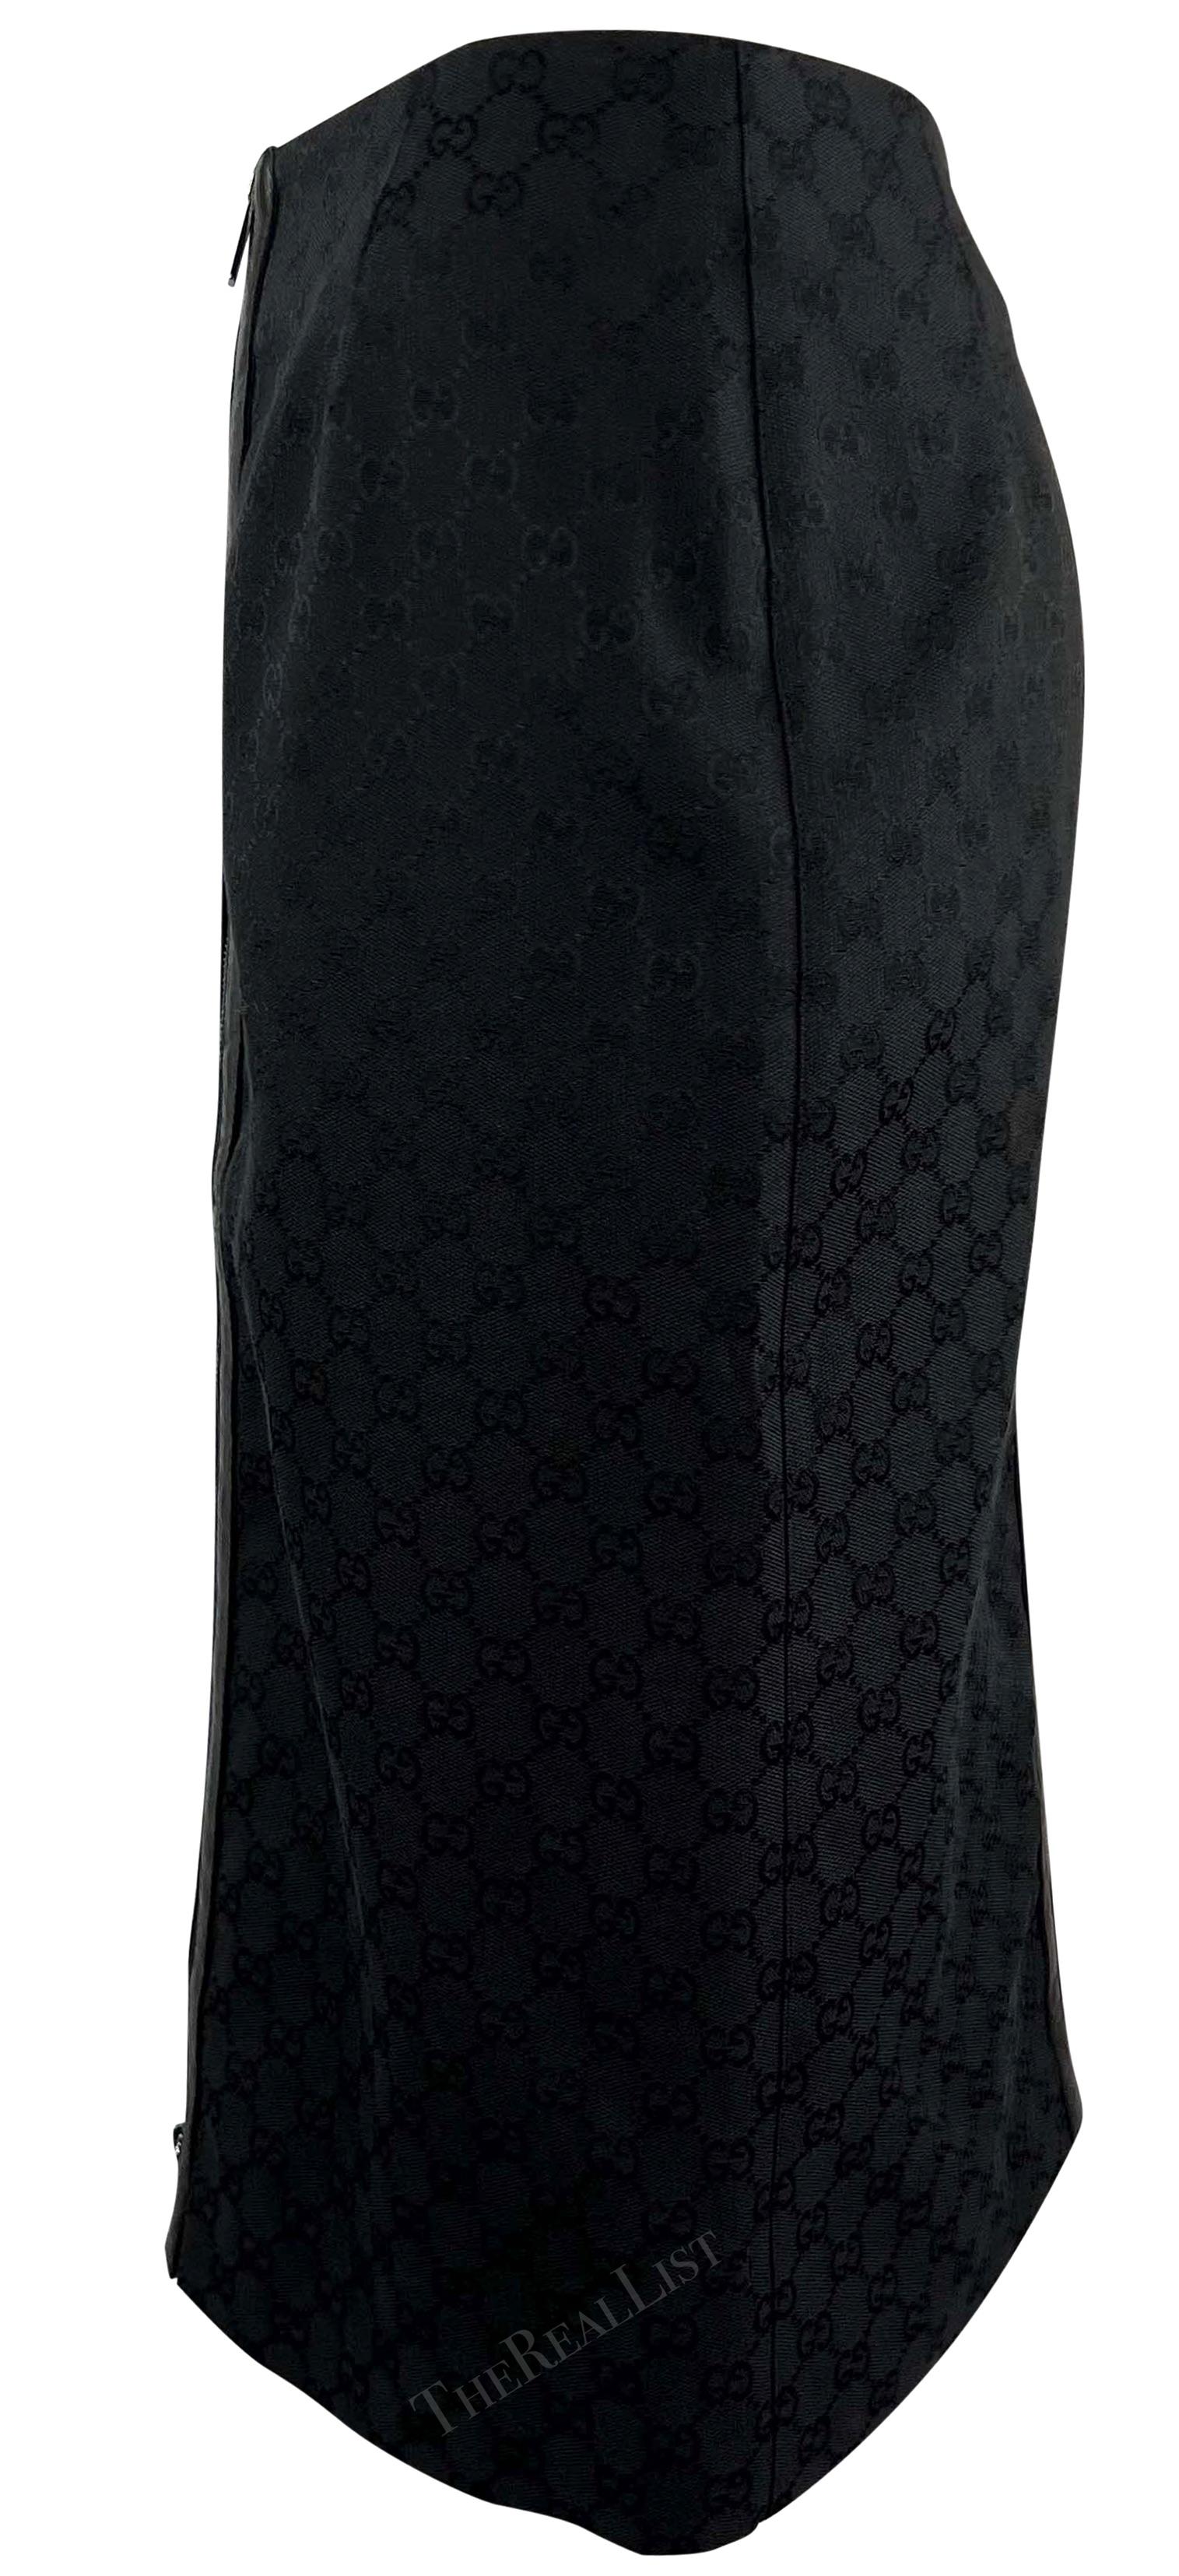 F/W 2000 Gucci by Tom Ford Black GG Monogram Zipper Pencil Skirt In Excellent Condition For Sale In West Hollywood, CA